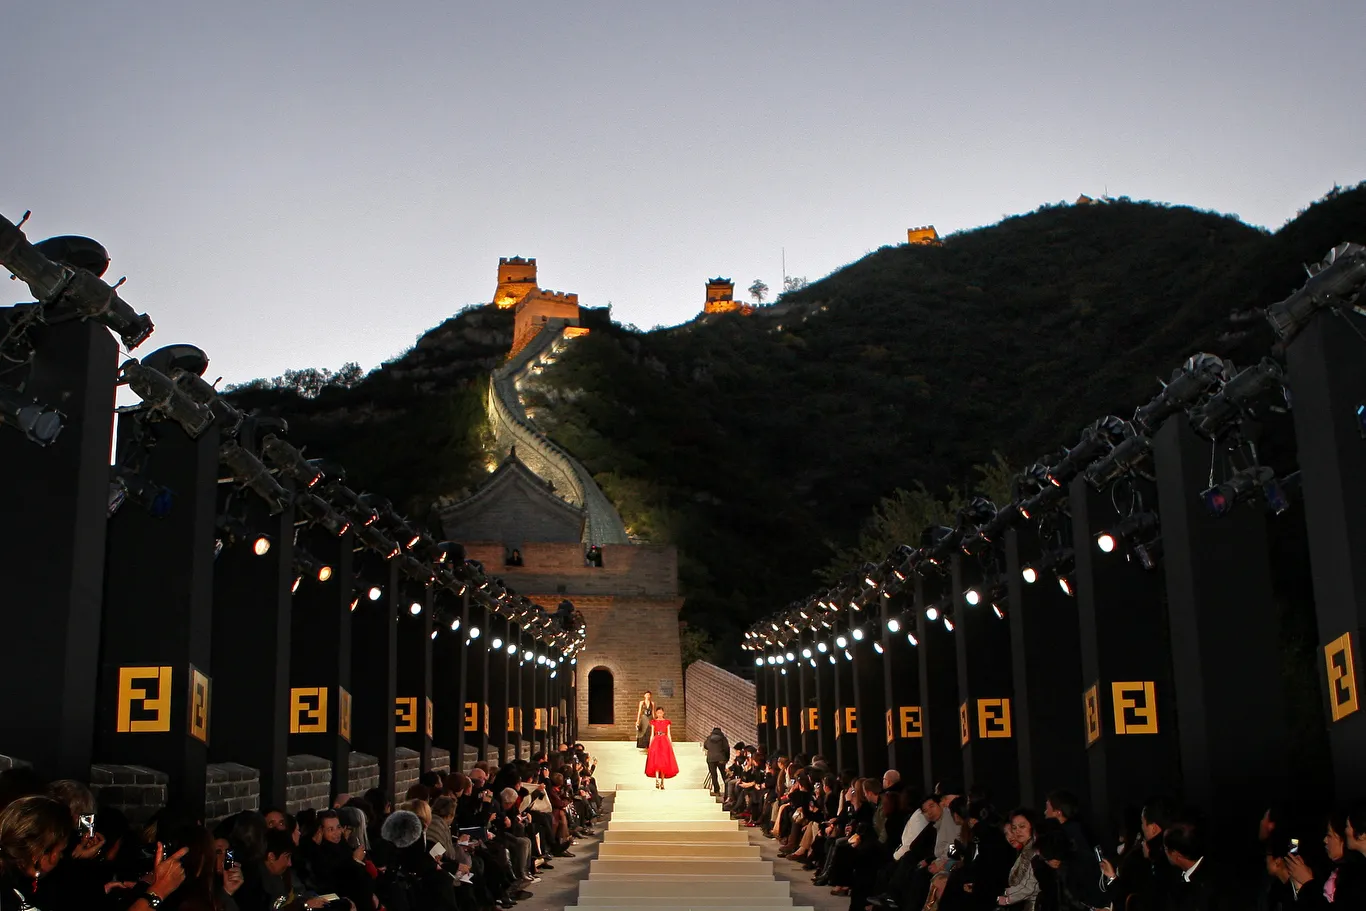 Fendi's show at the Great Wall of China - History And Evolution Of Fendi